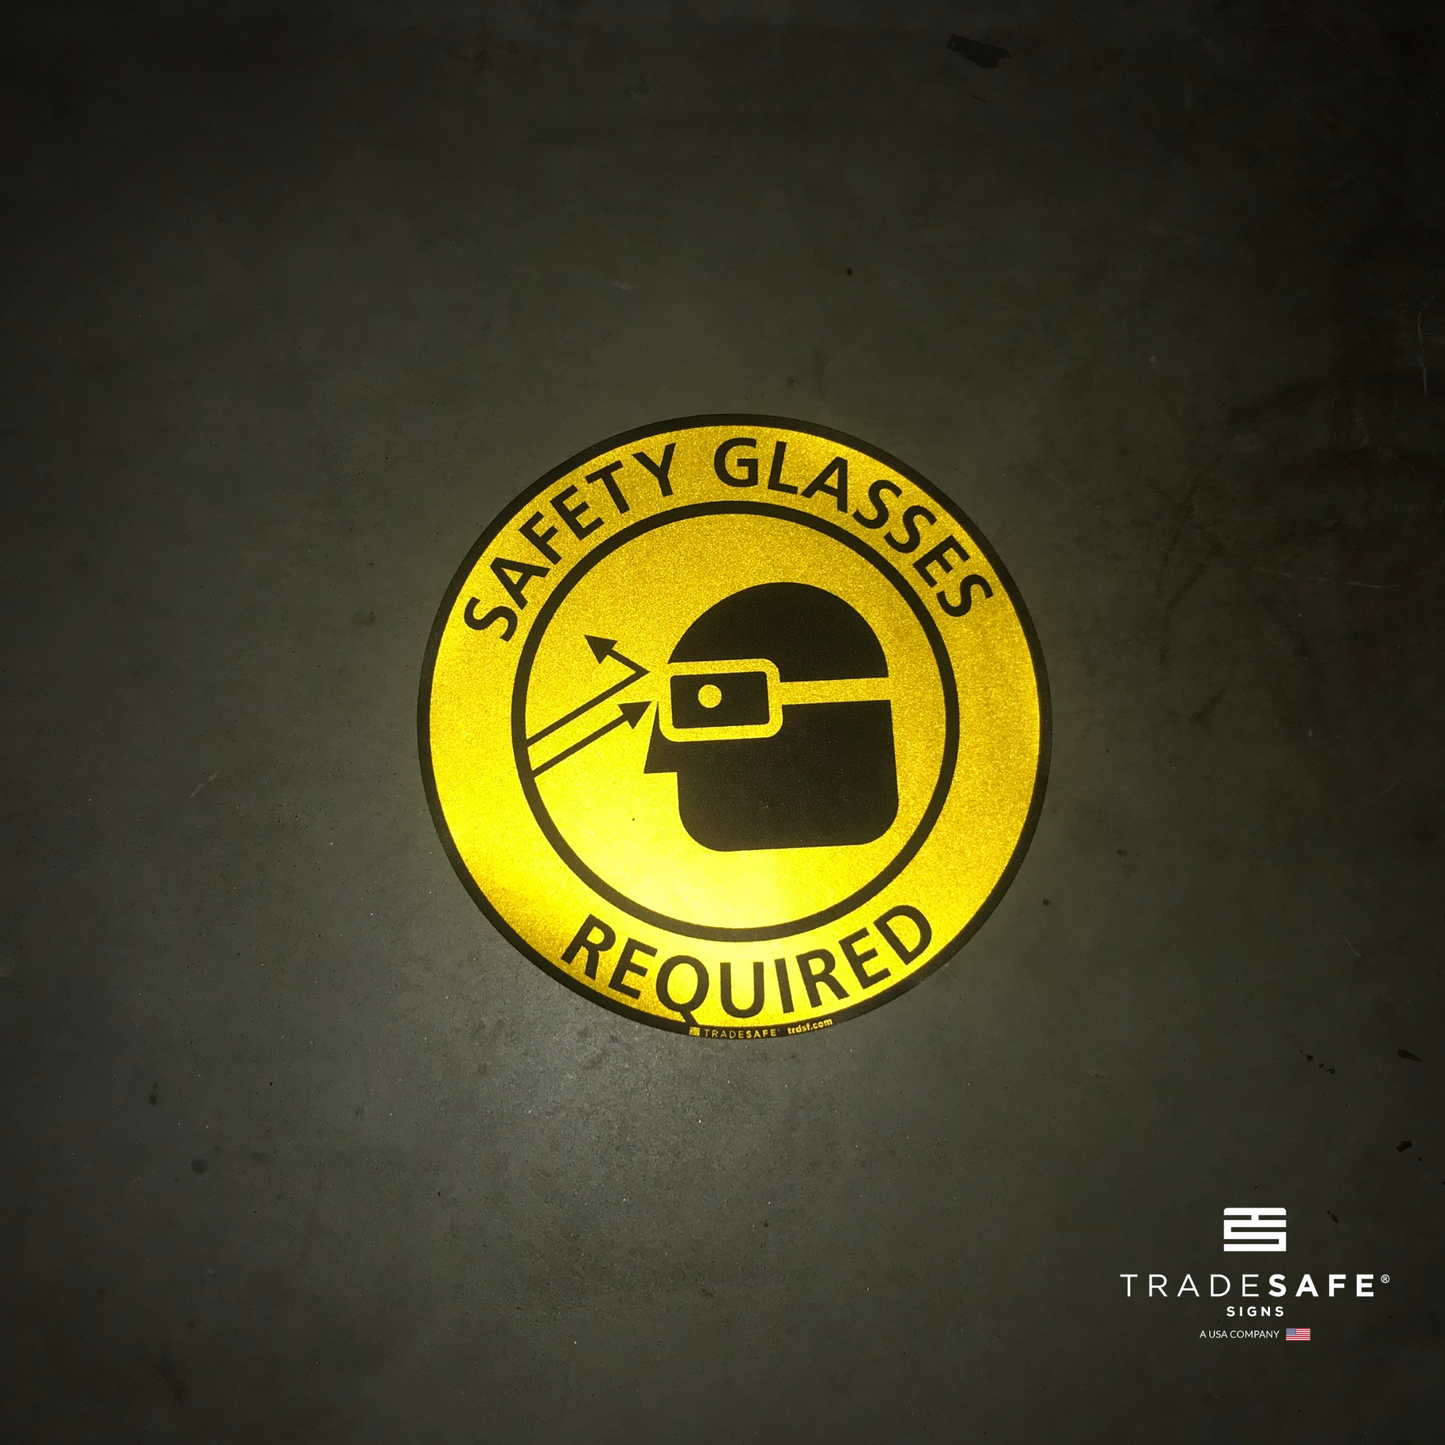 reflective attribute of adhesive vinyl "safety glasses required" sign on black background